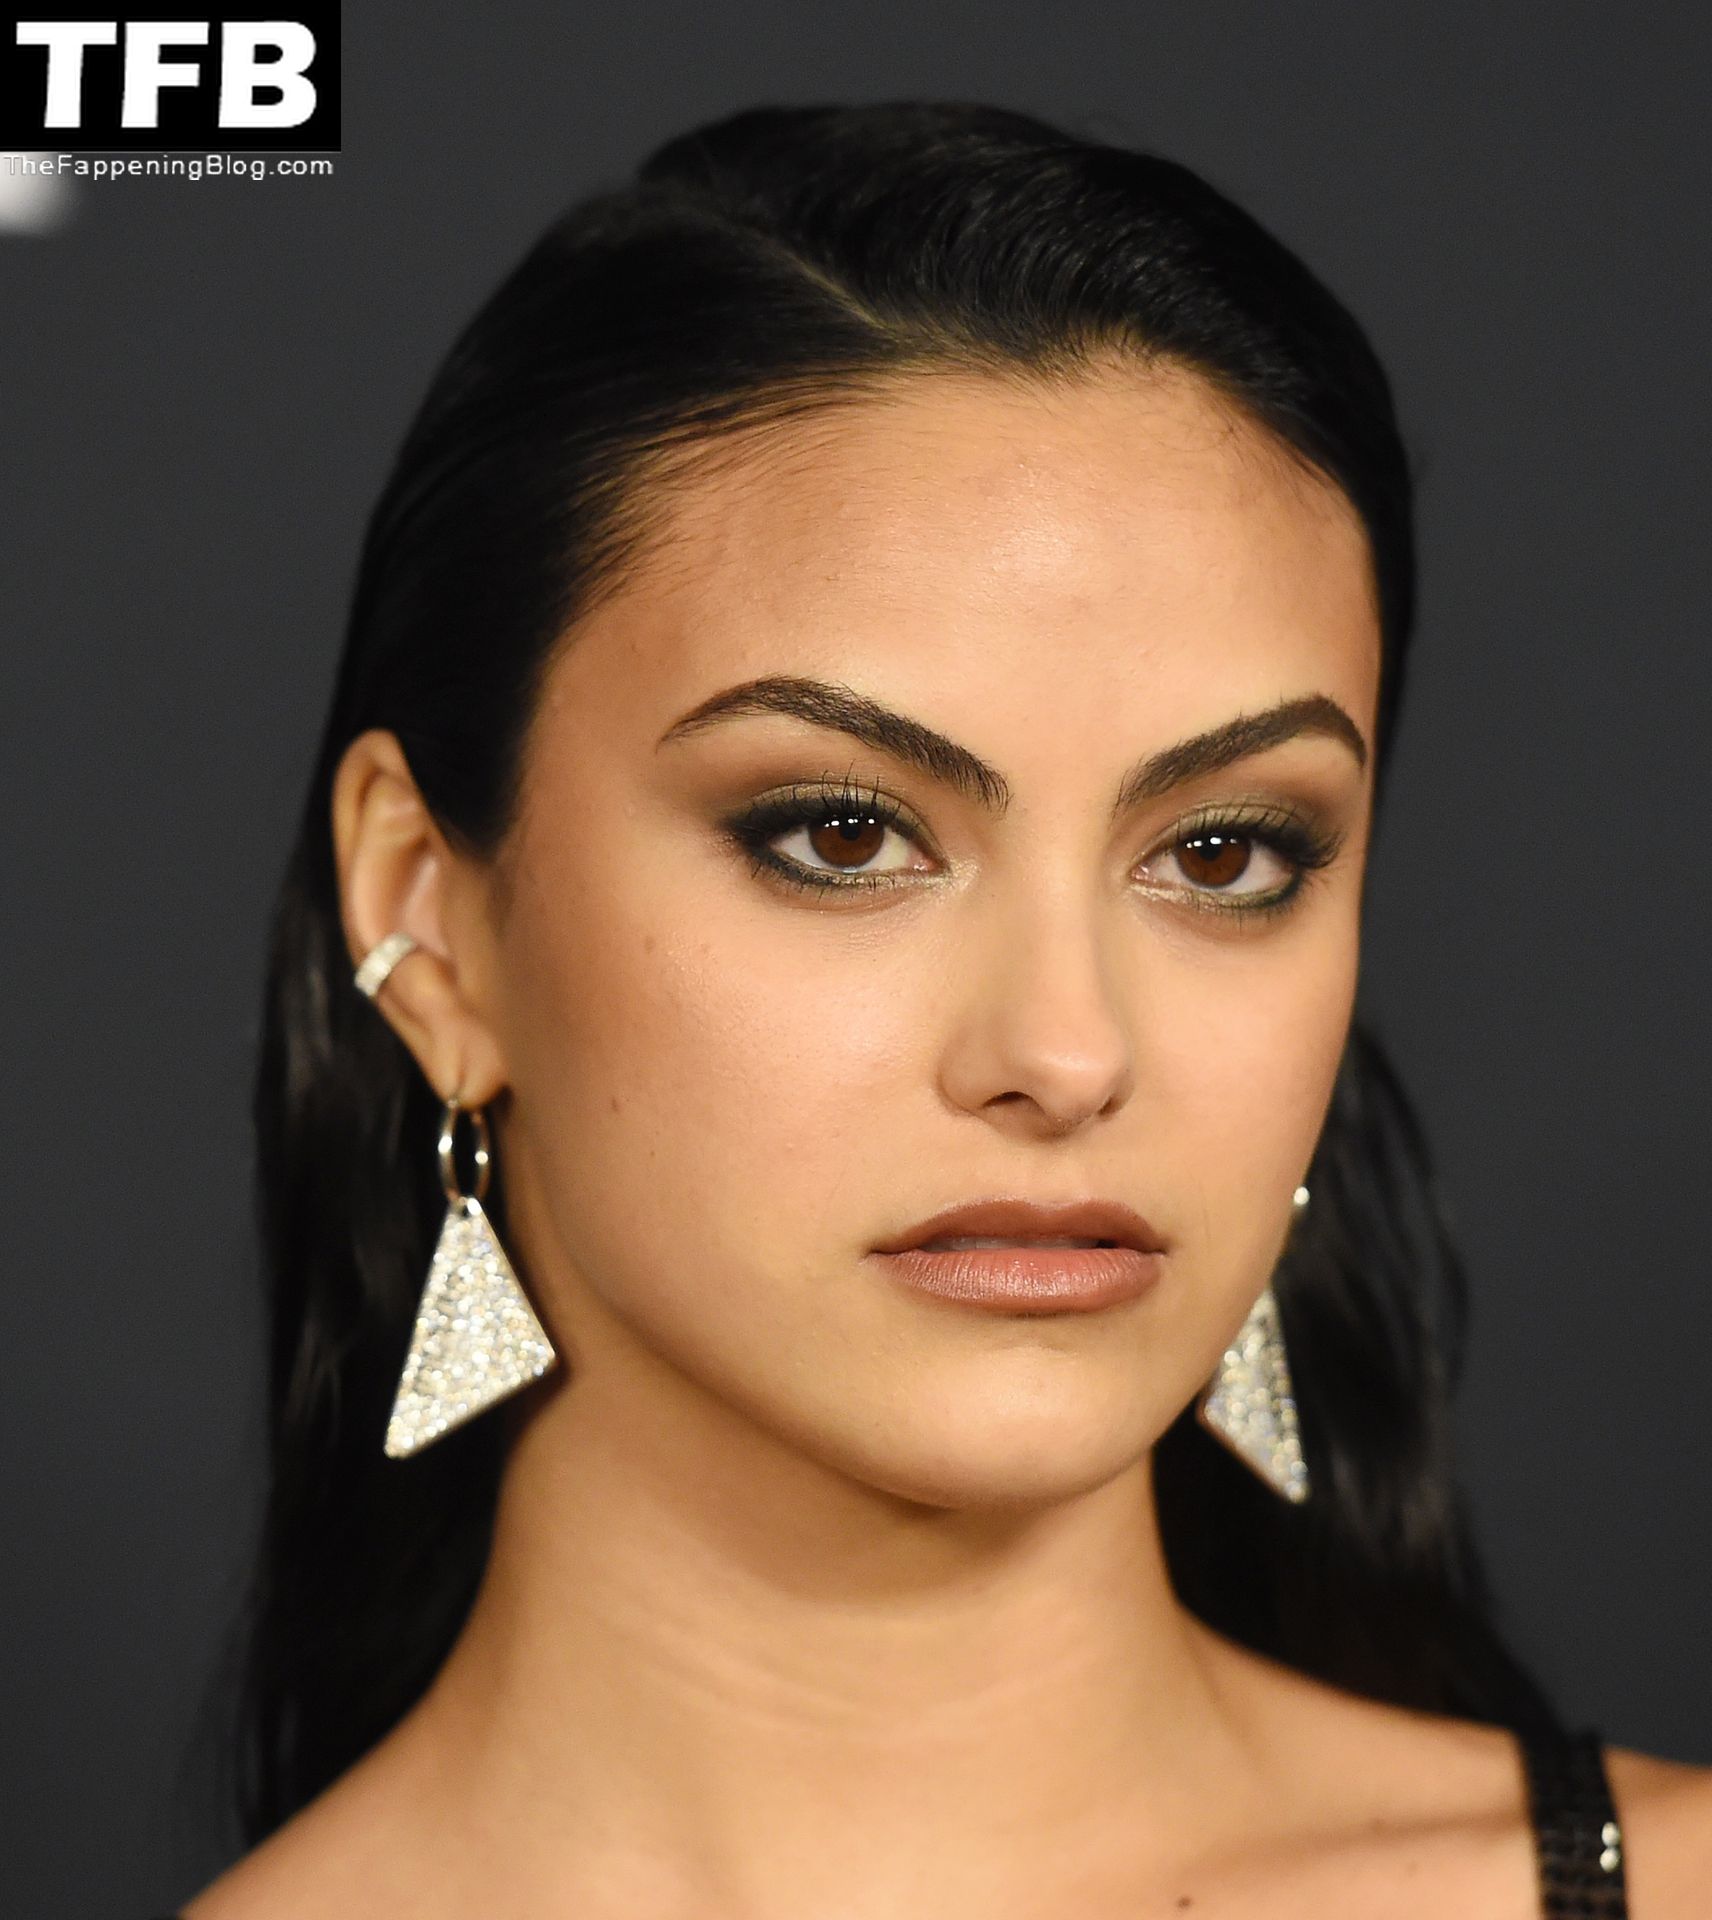 Camila-Mendes-See-Through-Tits-The-Fappening-Blog-65.jpg